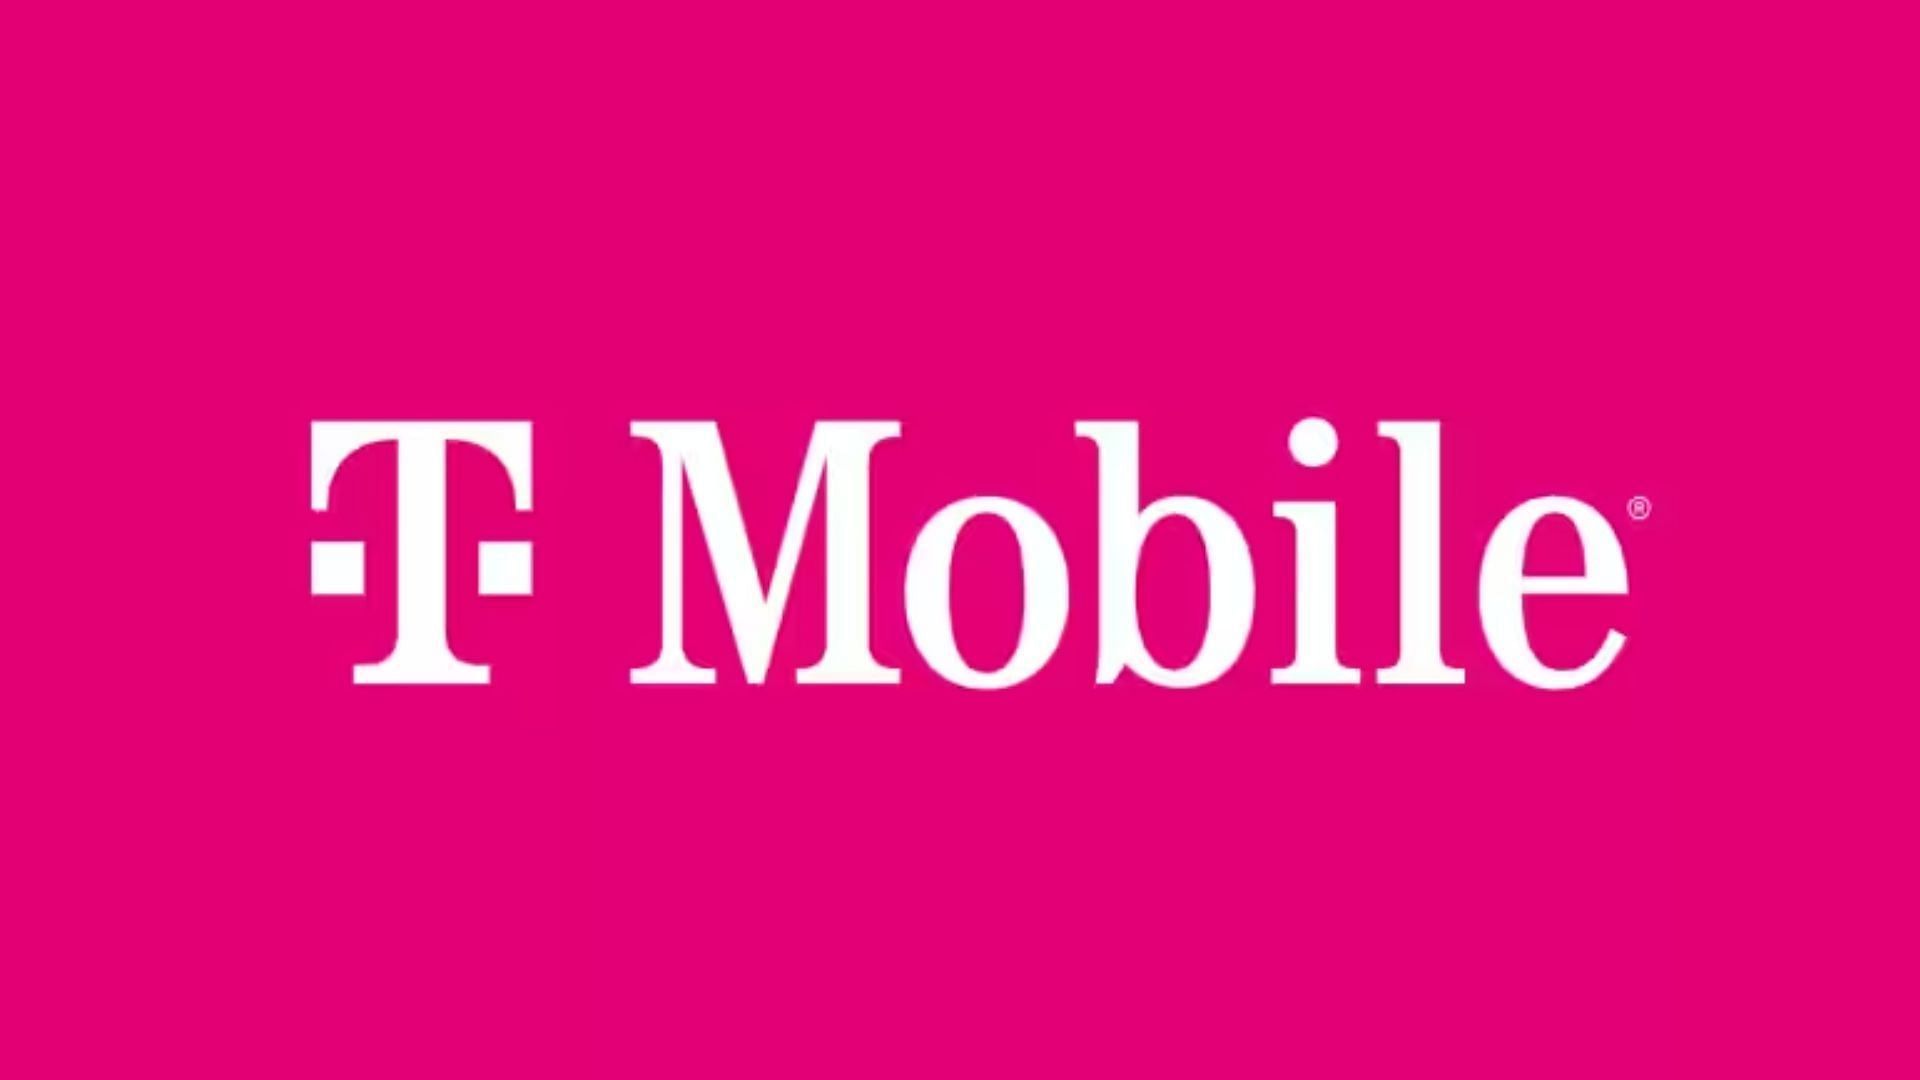 The best carrier partner between Verizon, T-Mobile, and AT&amp;T. (Image via T-Mobile)